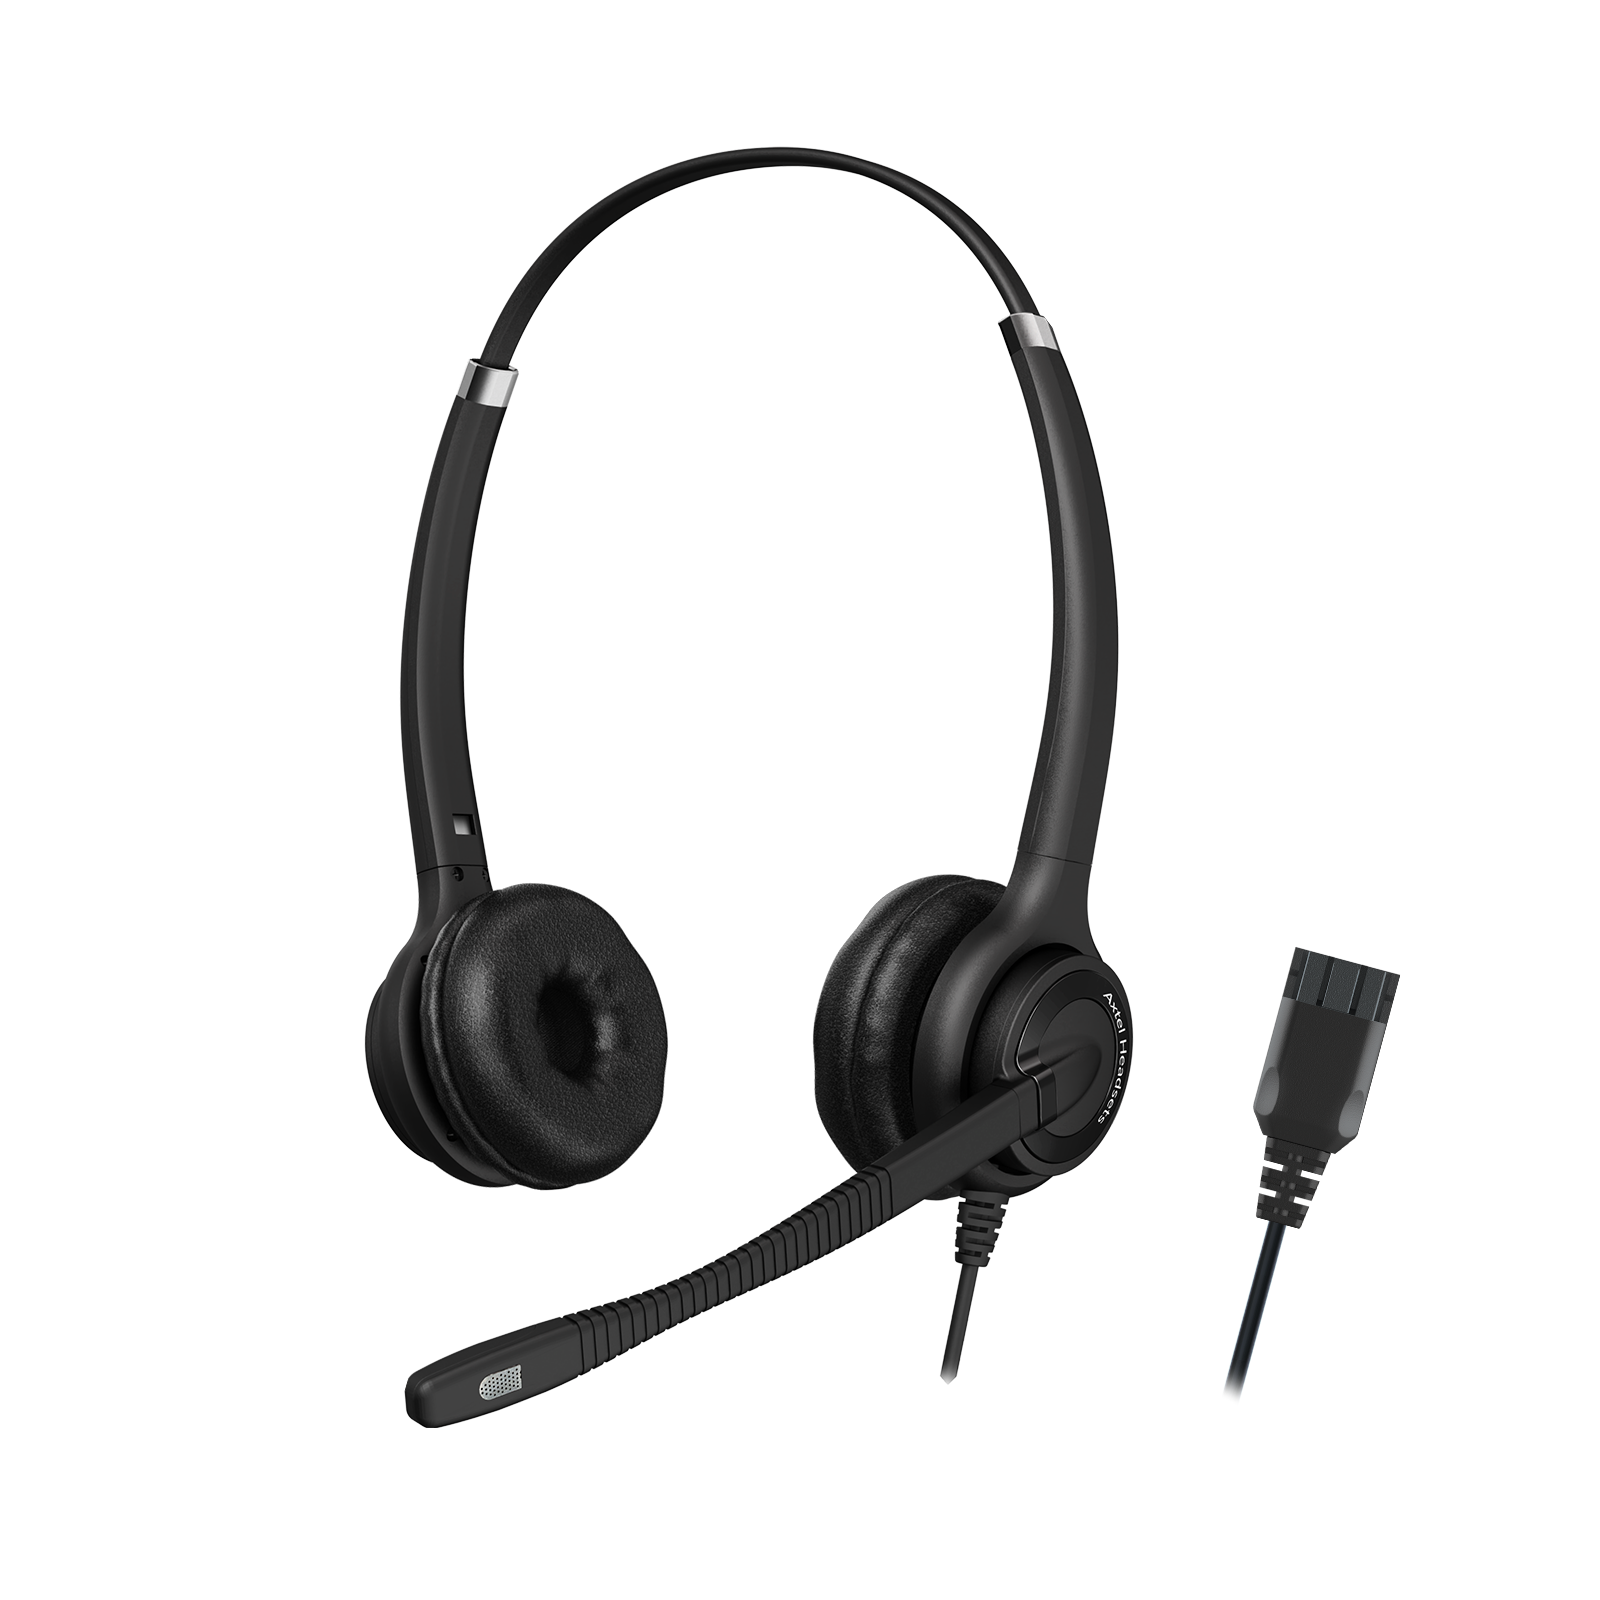 AXTEL-AXH-EHDD-HEADSET-WITH-CONNECTOR